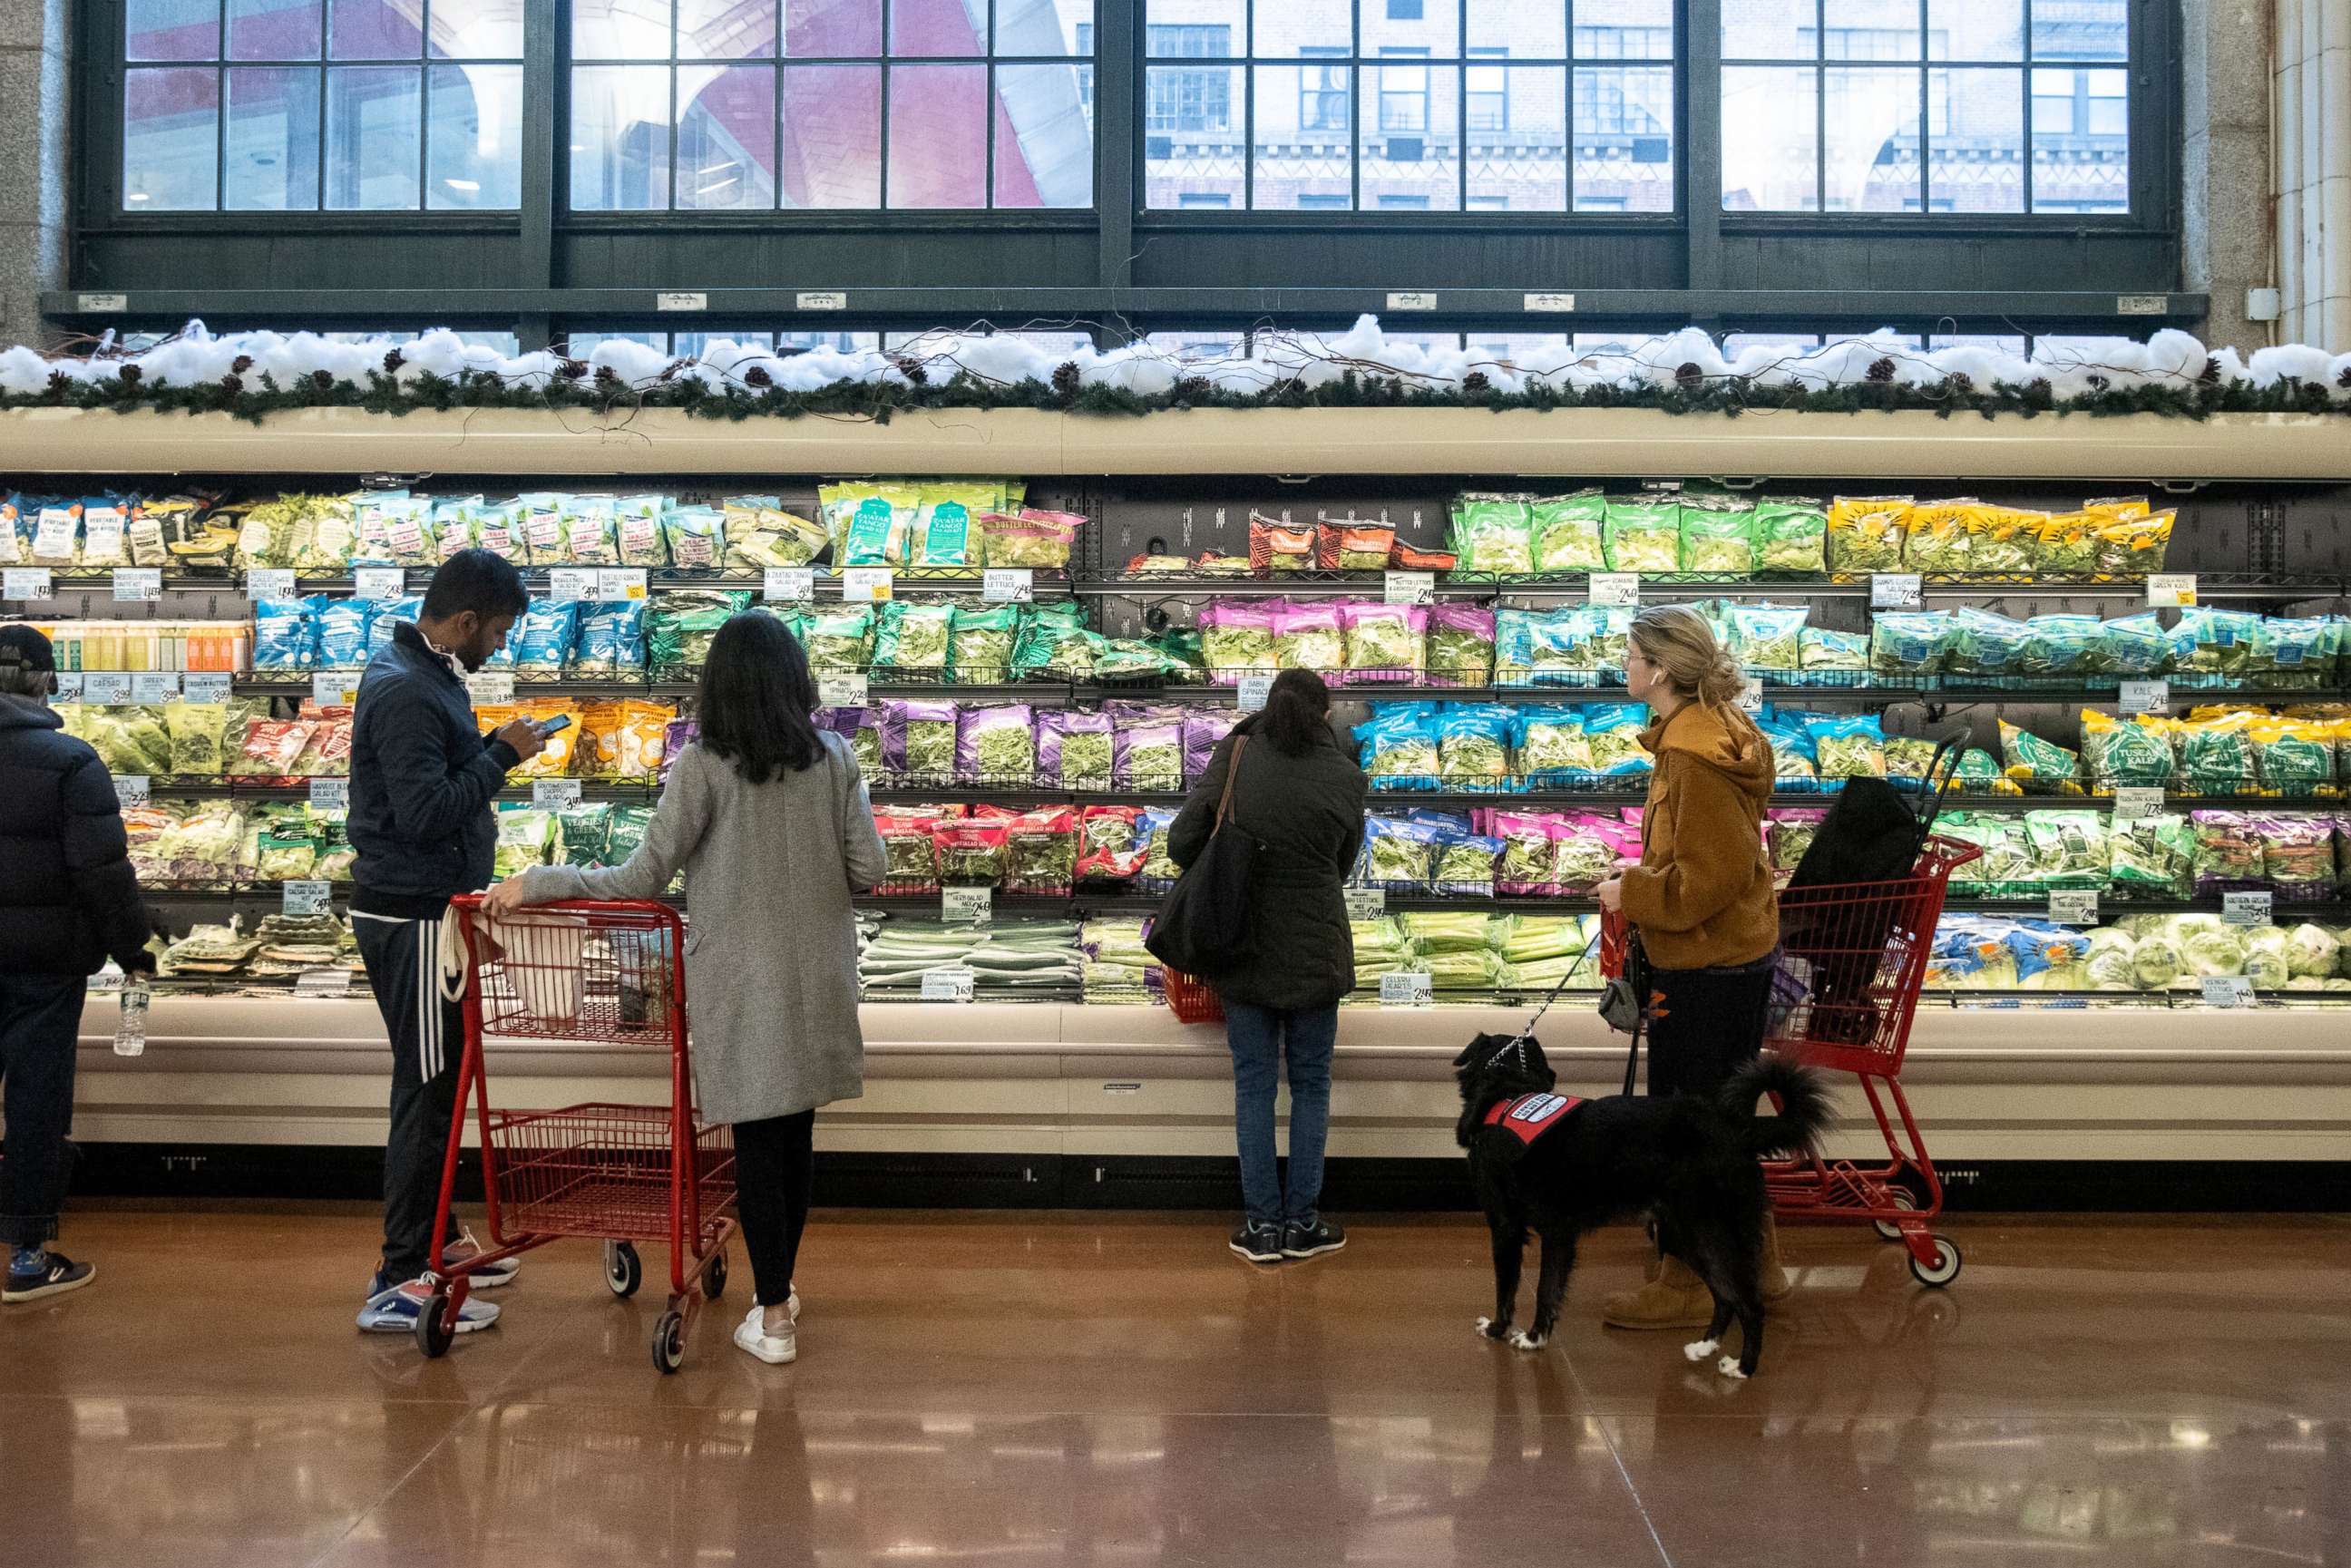 PHOTO: Customers shop at the Trader Joe's Upper East Side Bridgemarket grocery store in New York, Dec. 2, 2021.